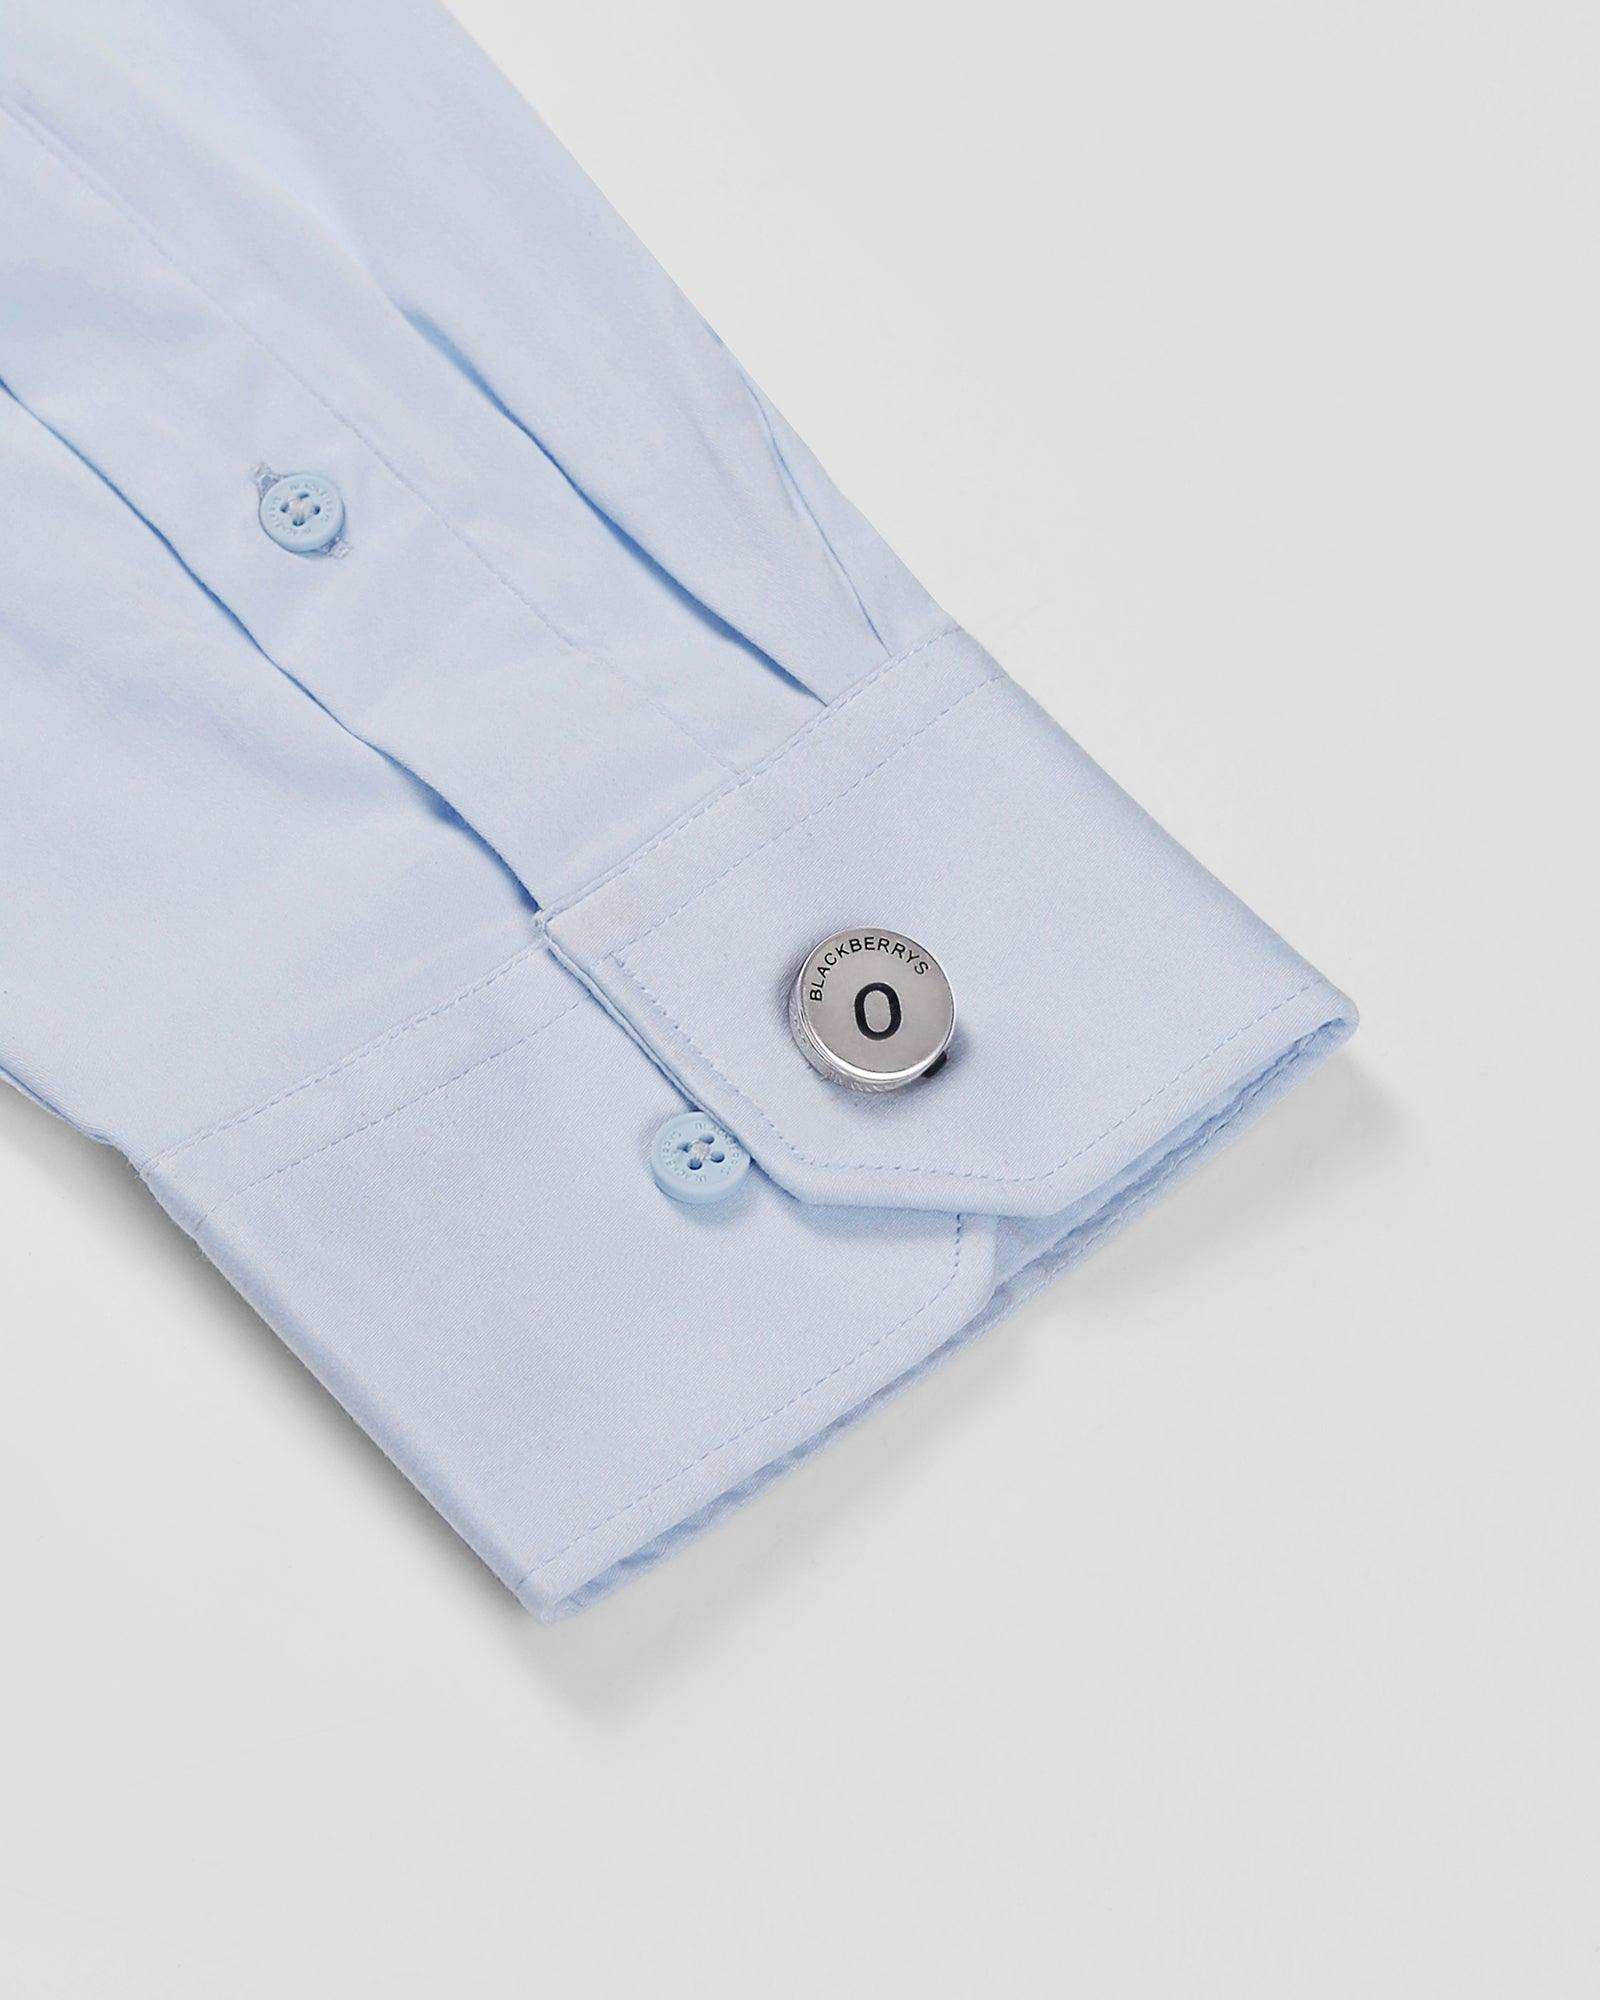 Personalised Shirt Button Cover With Alphabetic Initial-O